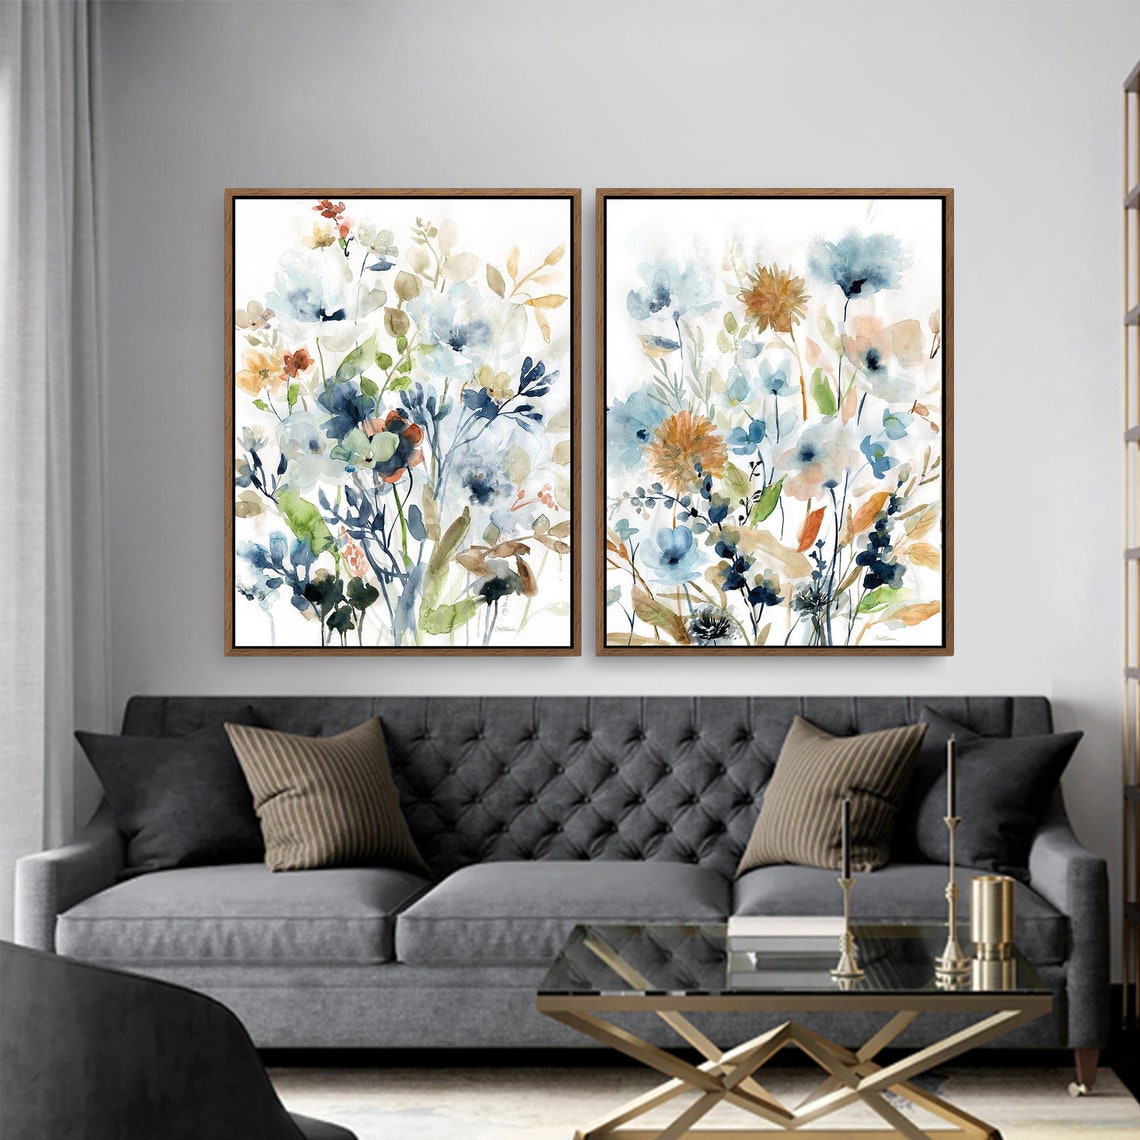 Bloom Flowers Watercolors Print Wall Art on Wood Stretched Canvas with Frame for Vintage Home Decor